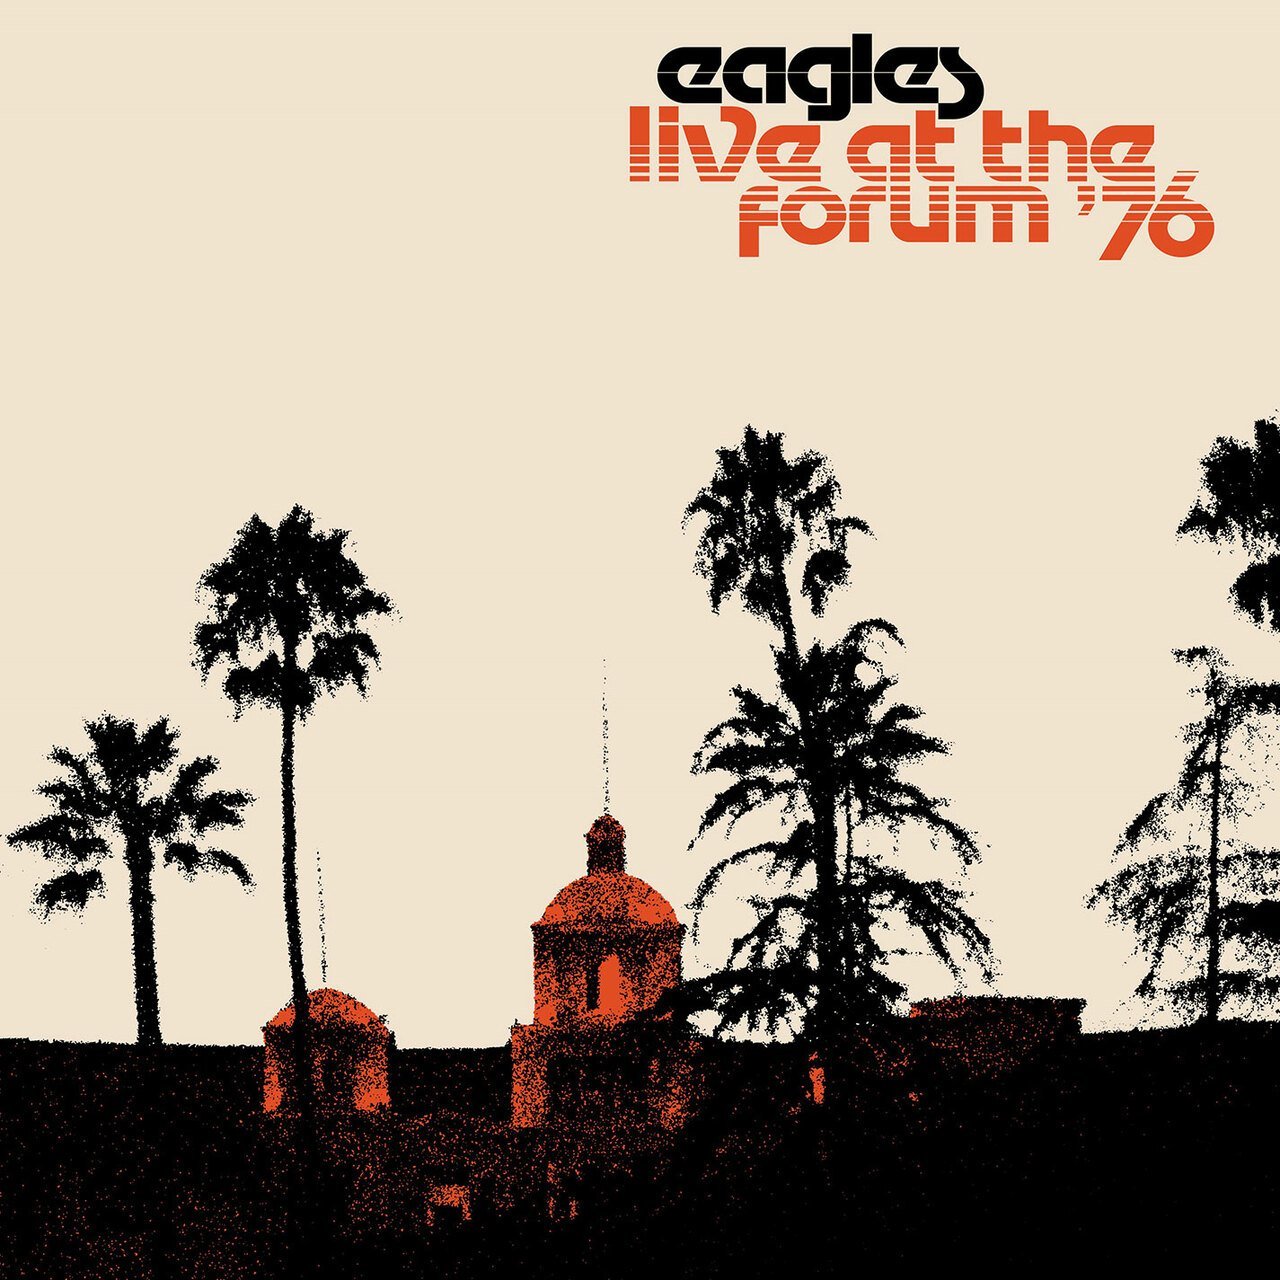 LIVE AT THE FORUM 76